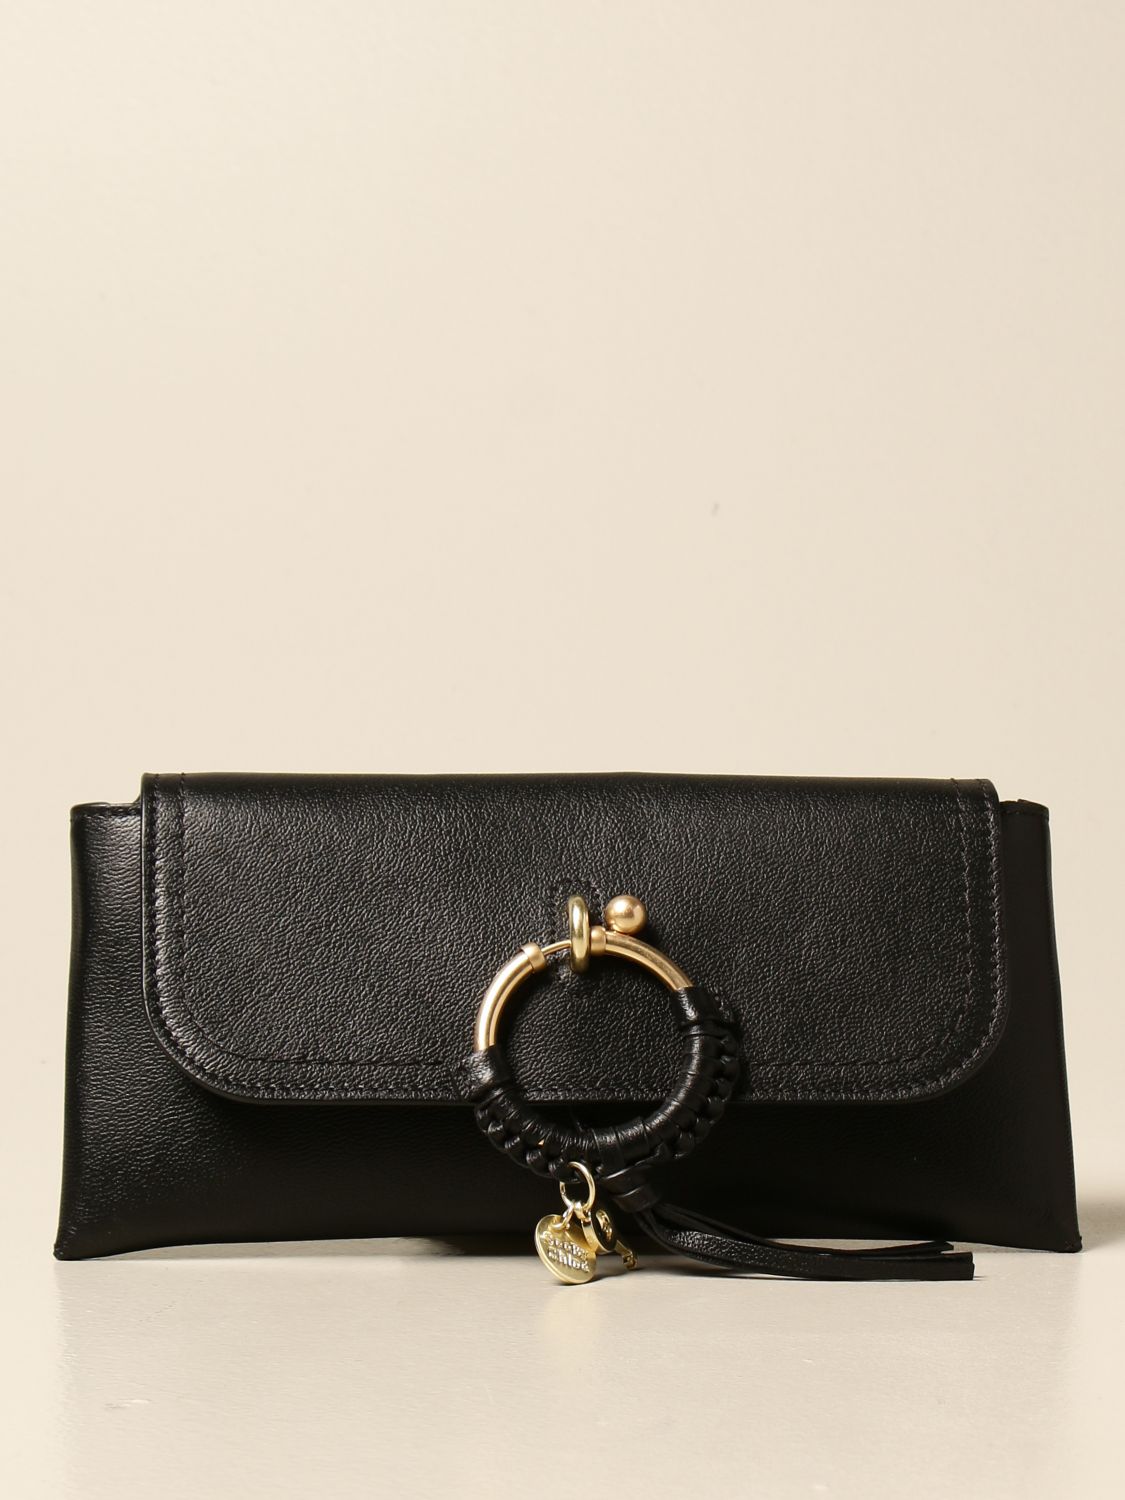 Chloe C Clutch with Chain: One Year Review — Raincouver Beauty